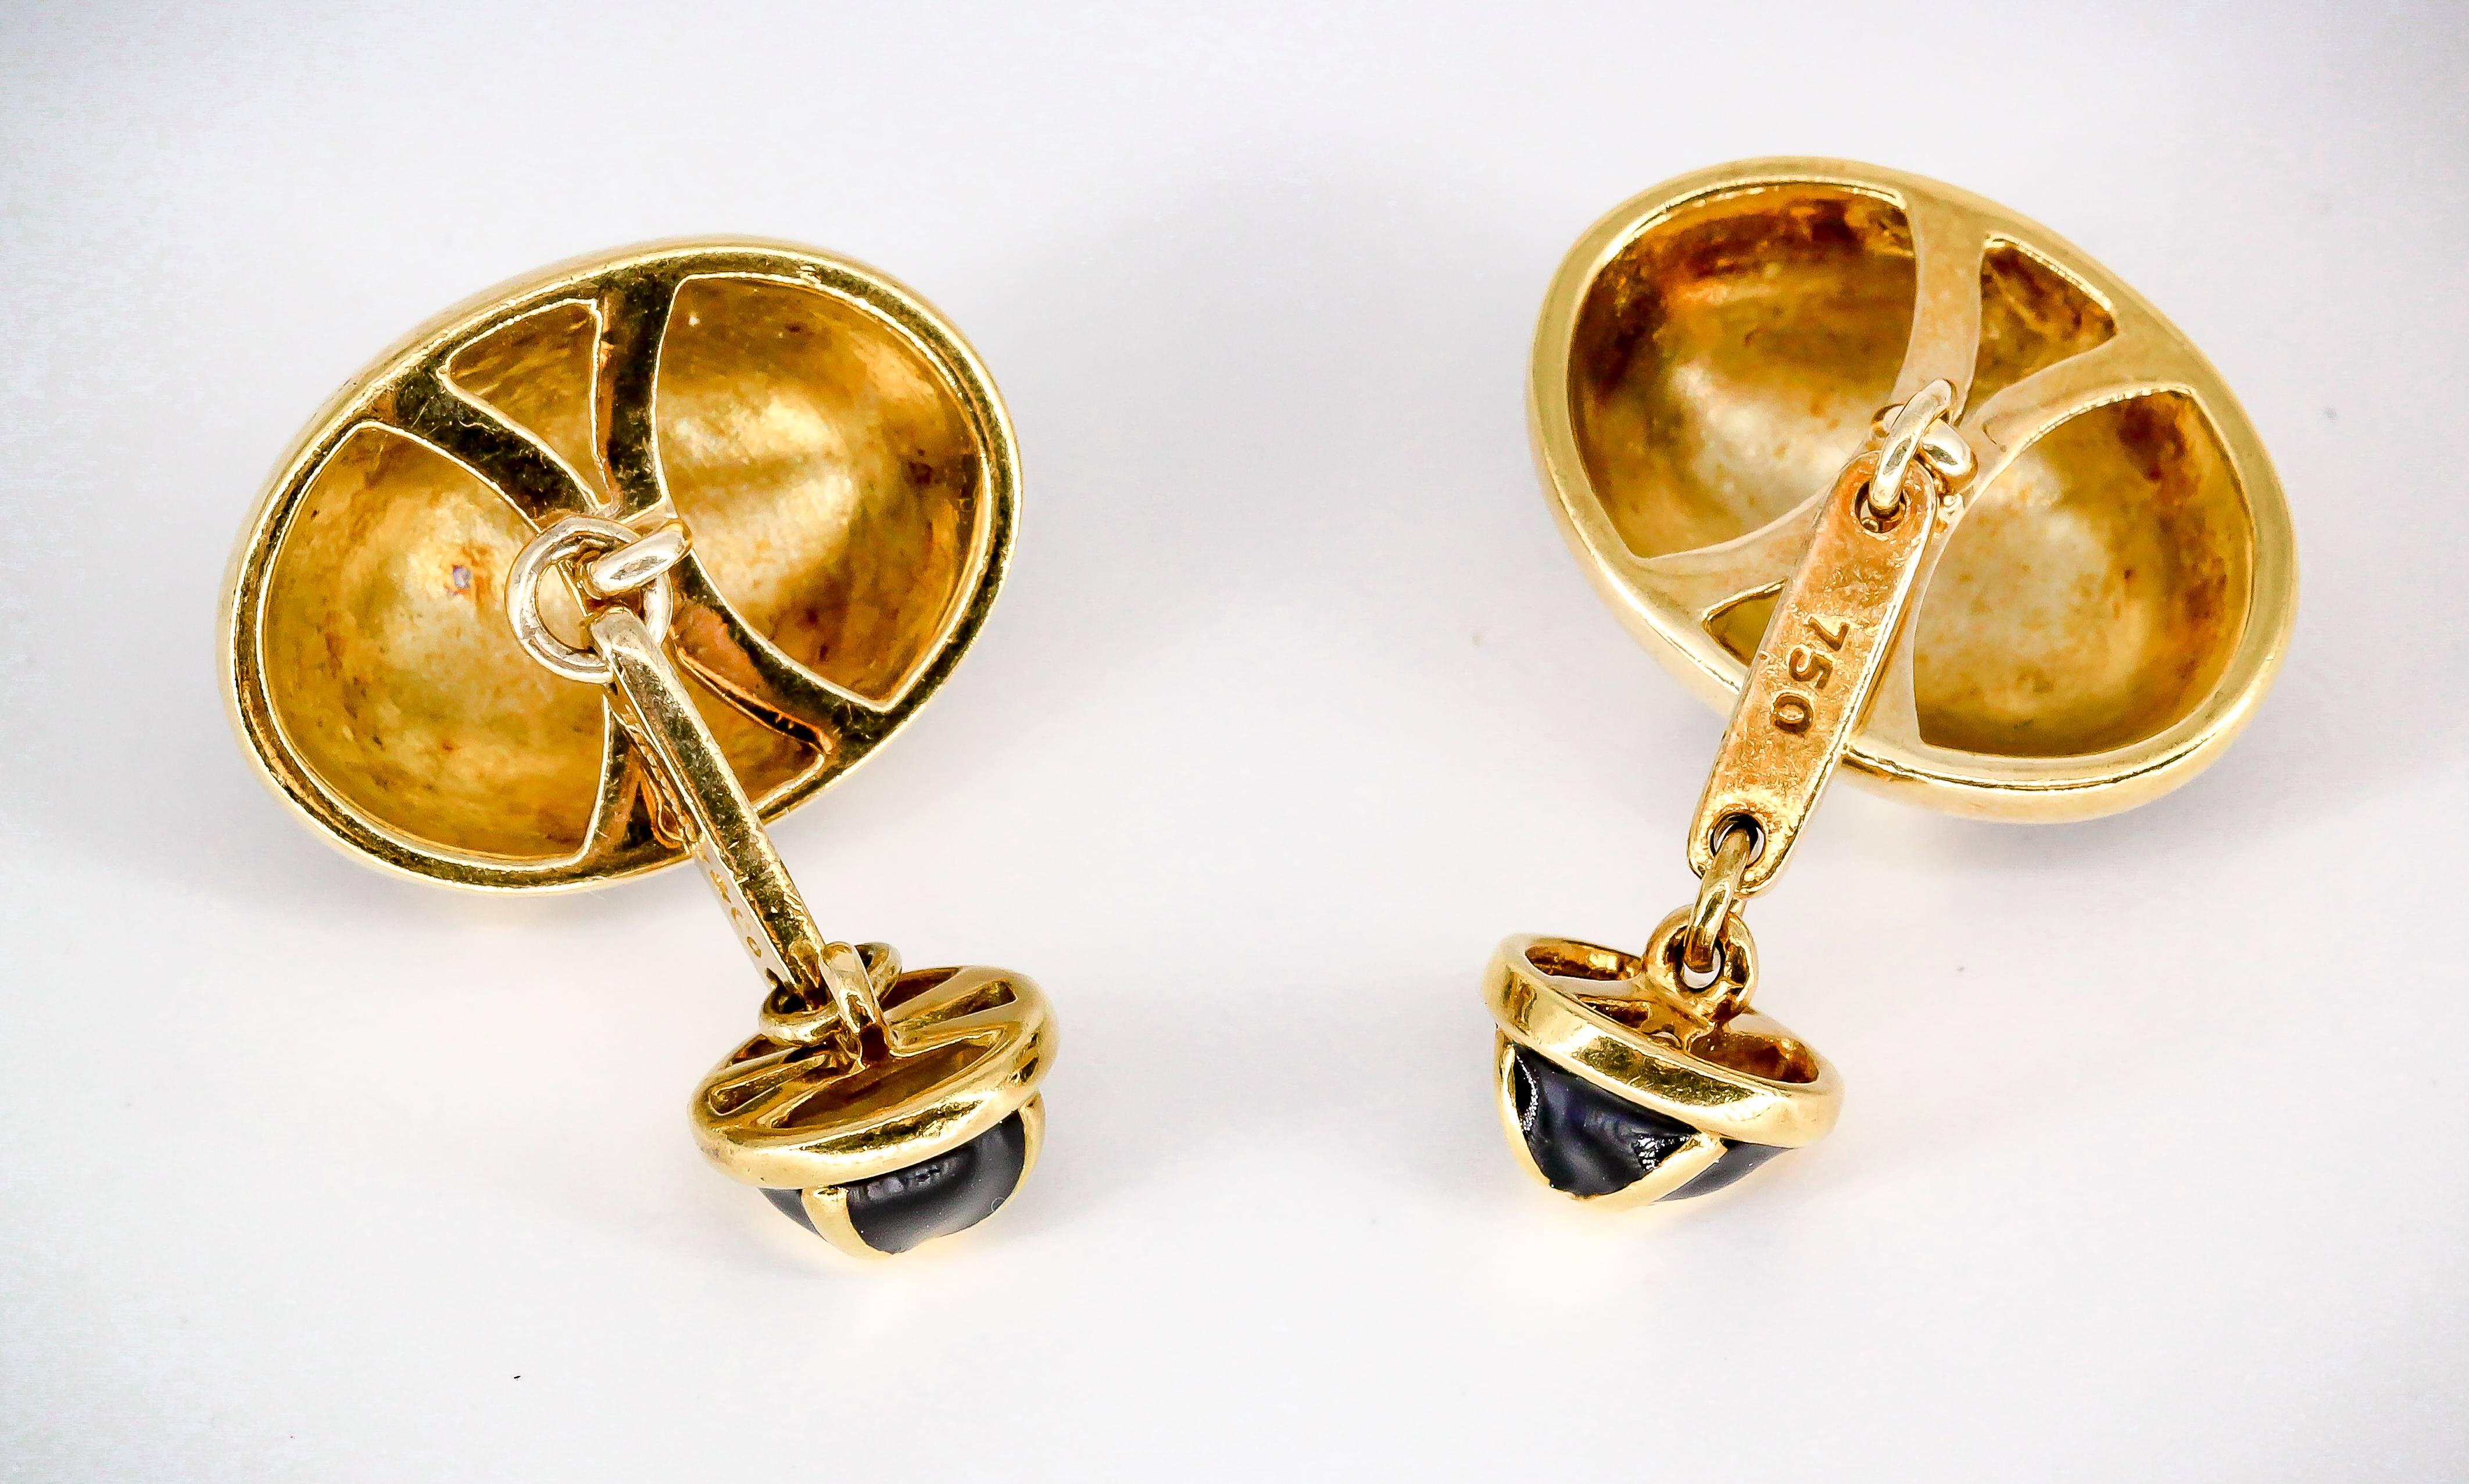 Handsome black enamel and 18K yellow gold cufflinks by Tiffany & Co. Shaped like ovals on one end and rounds on the other, with black enamel over an 18K yellow gold 